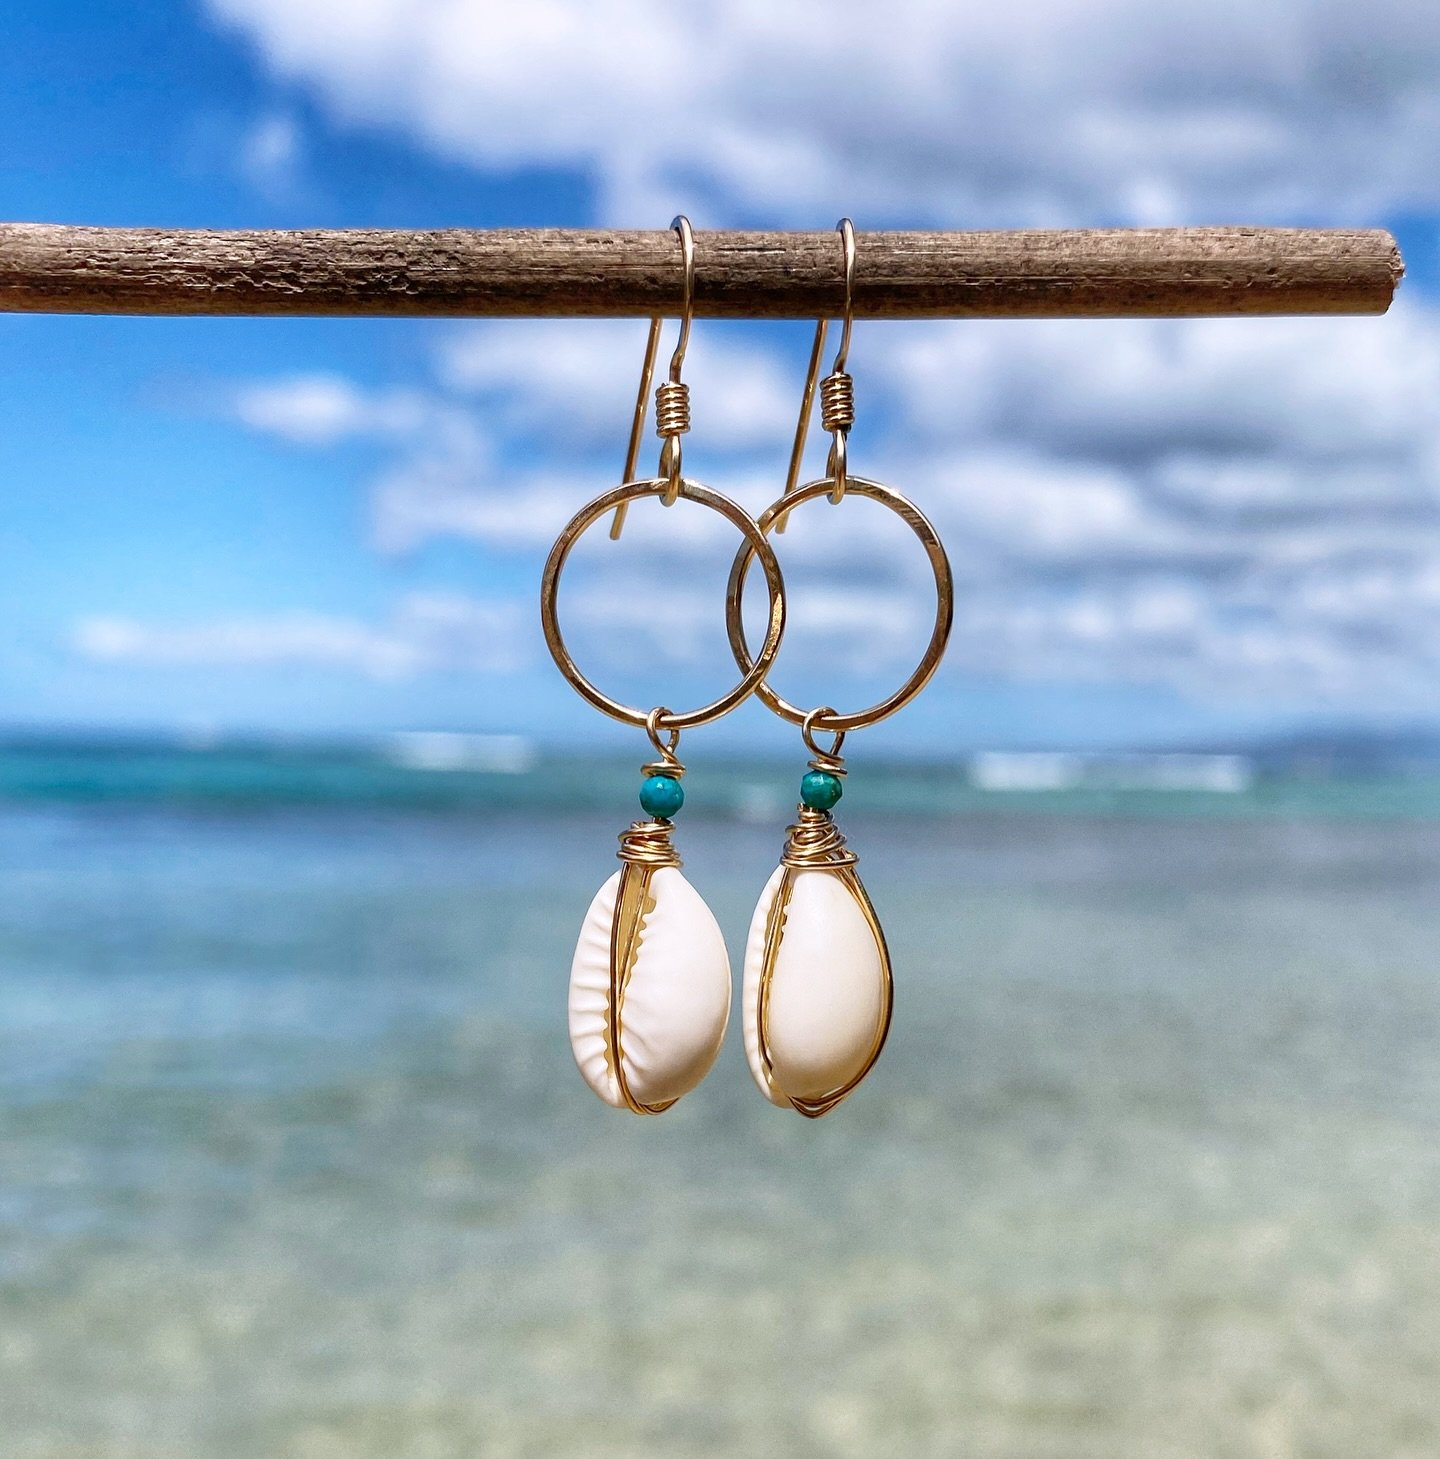 The cutest ALOHA FRIDAY earrings you have to have!! Raymi wore them all week on her tropical island adventure. Grab a pair for yourself at quinnsharp.com under Beach Earrings.